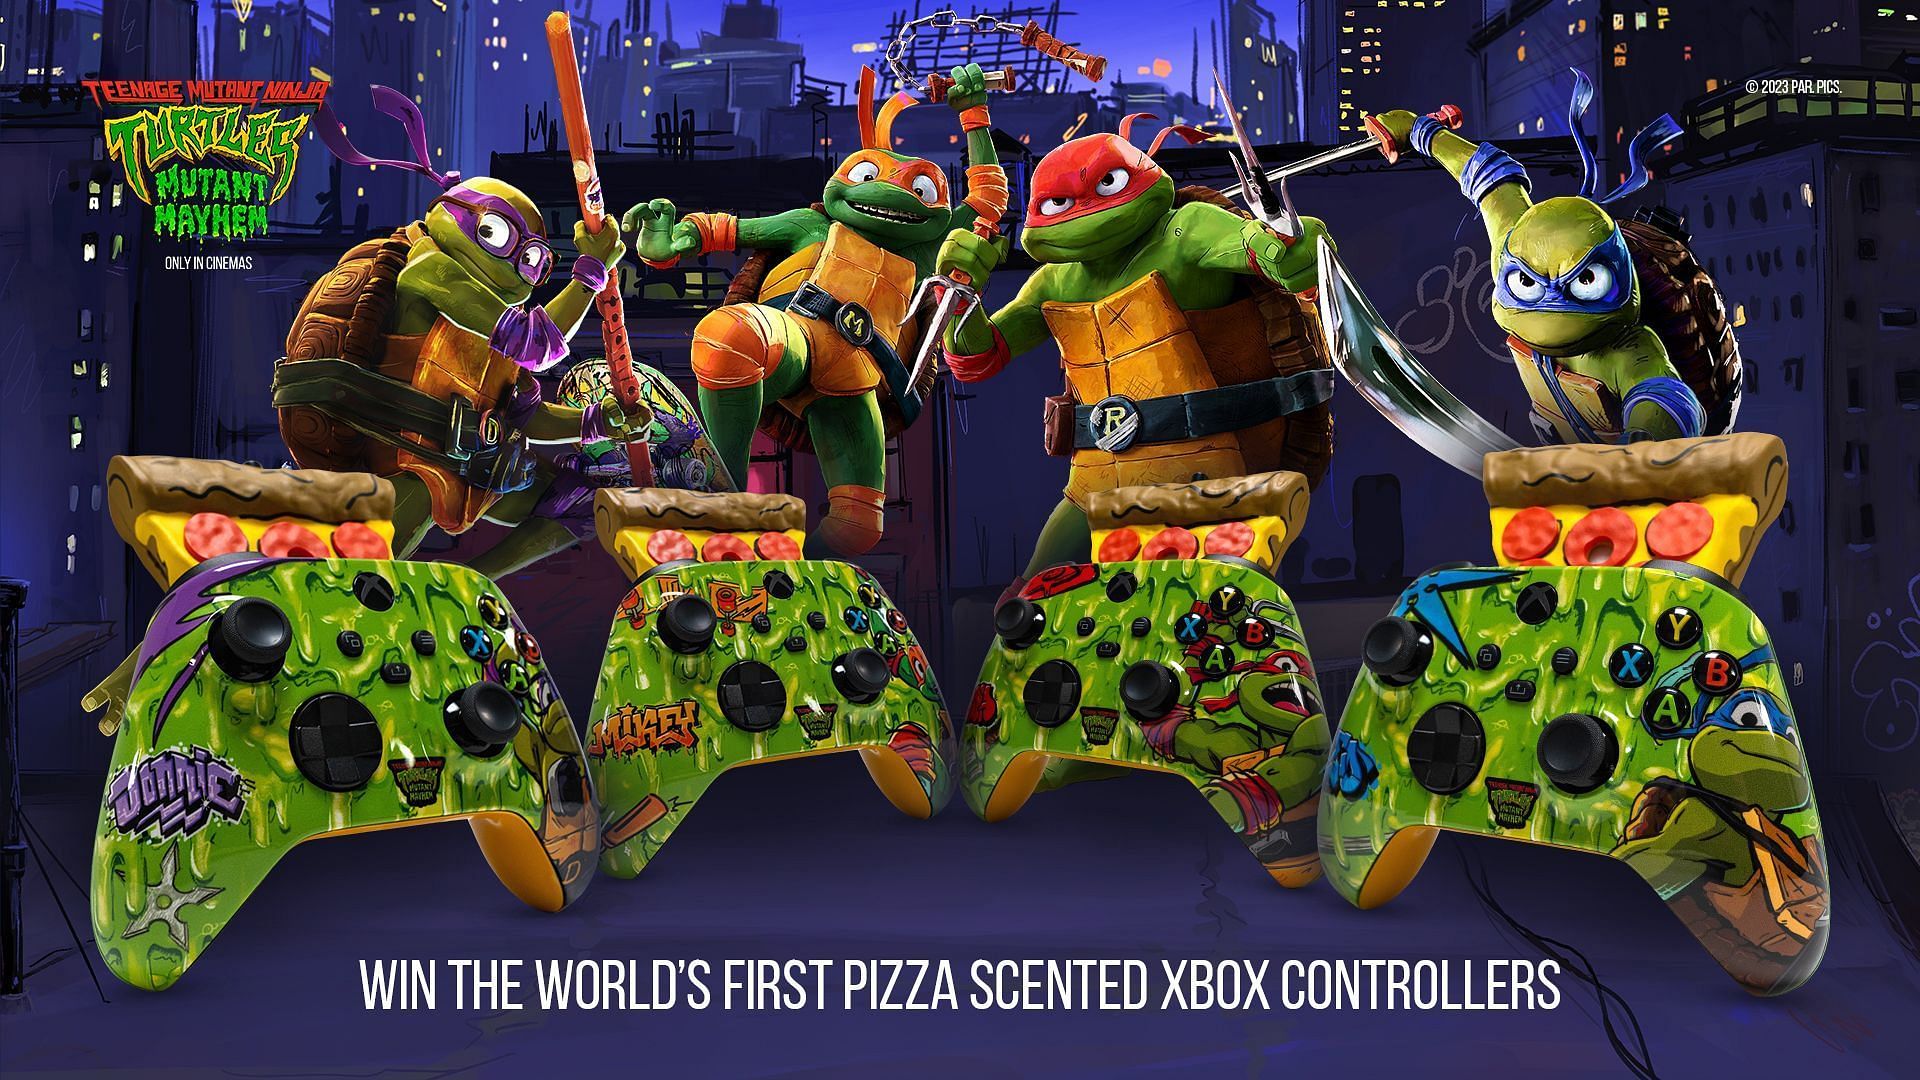 The four editions of the Xbox Teenage Ninja Turtle pizza-scented controllers (Image via Microsoft)